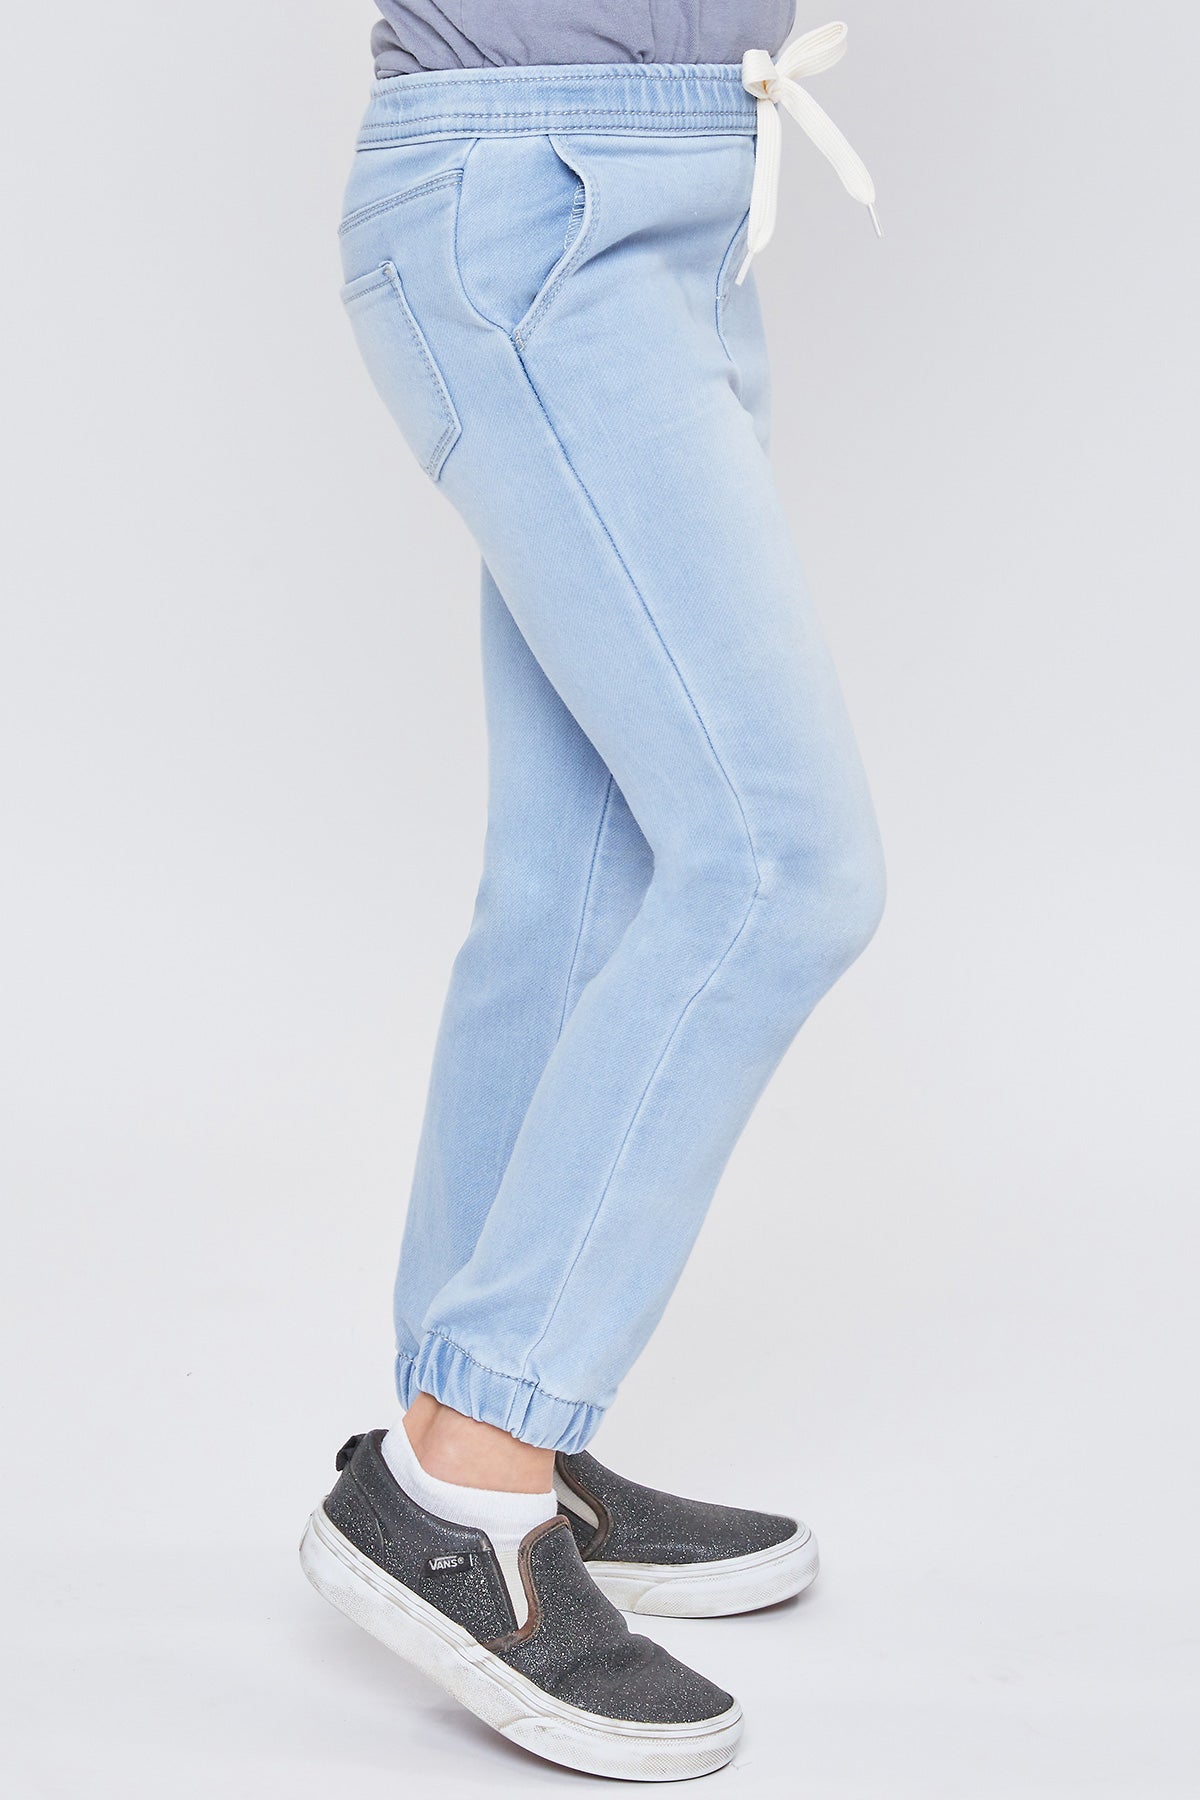 Missy Skinny Ankle Jean With Double Frayed Hem Made With Recycled Fabric , Pack Of 12 from Royalty for Me